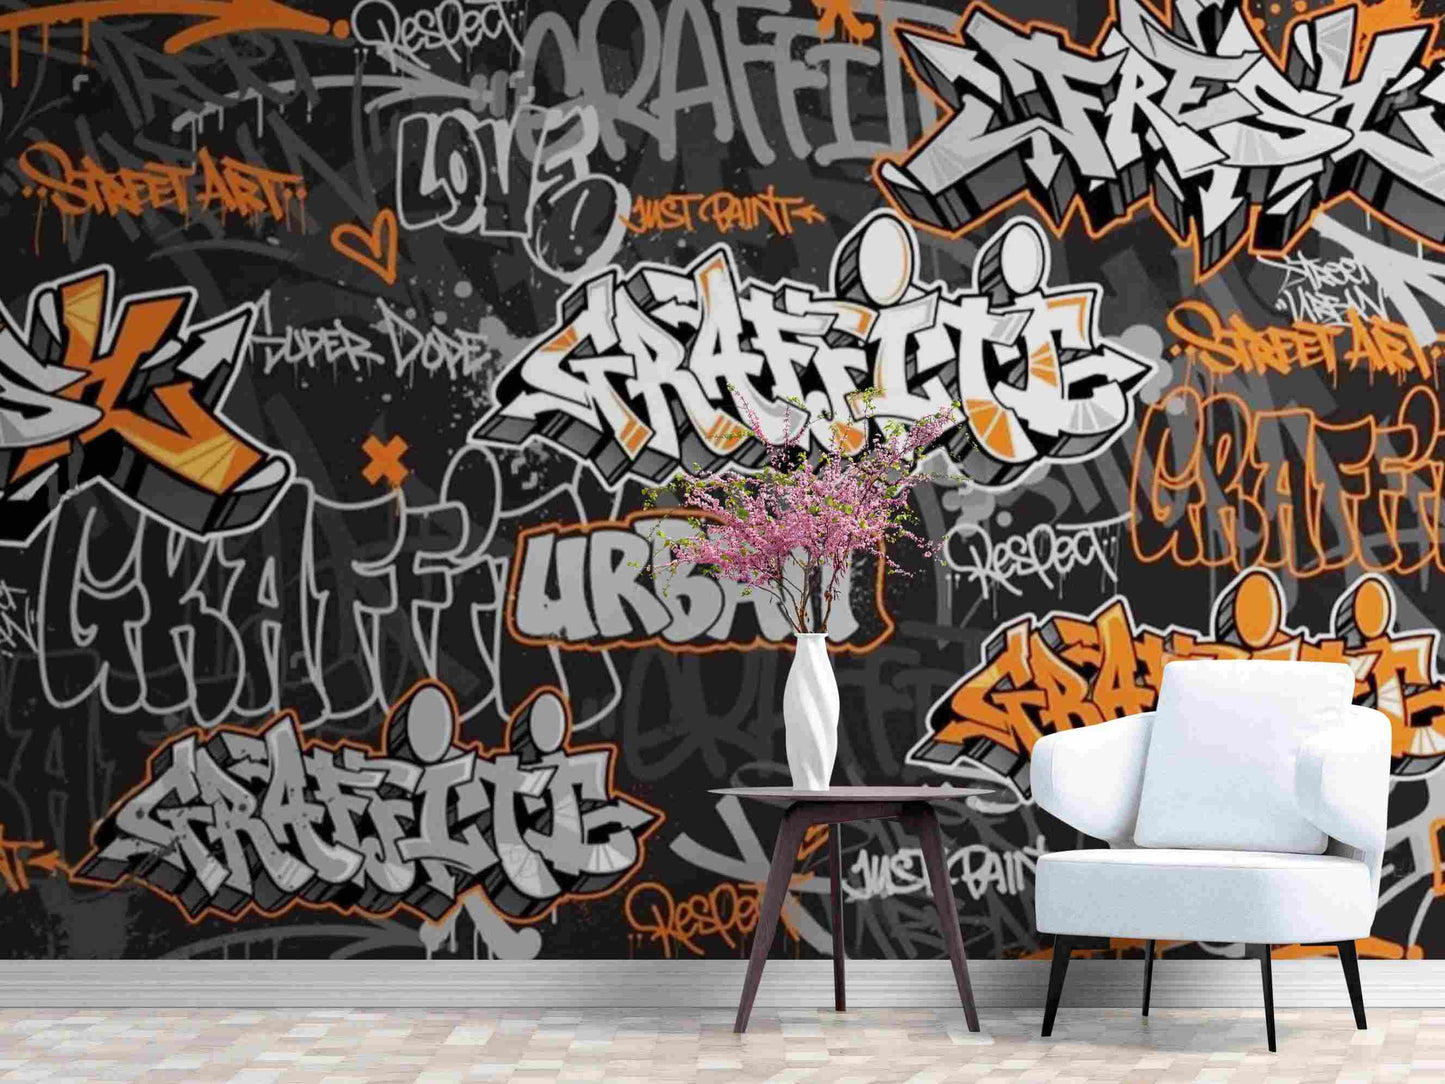 A photo of a wall covered in colorful urban graffiti wallpaper, featuring hip-hop inspired art and designs. The artwork includes bold text, portraits of famous musicians, and various symbols commonly associated with hip-hop culture. The vibrant colors and intricate details of the wall decor create an eye-catching and dynamic display.